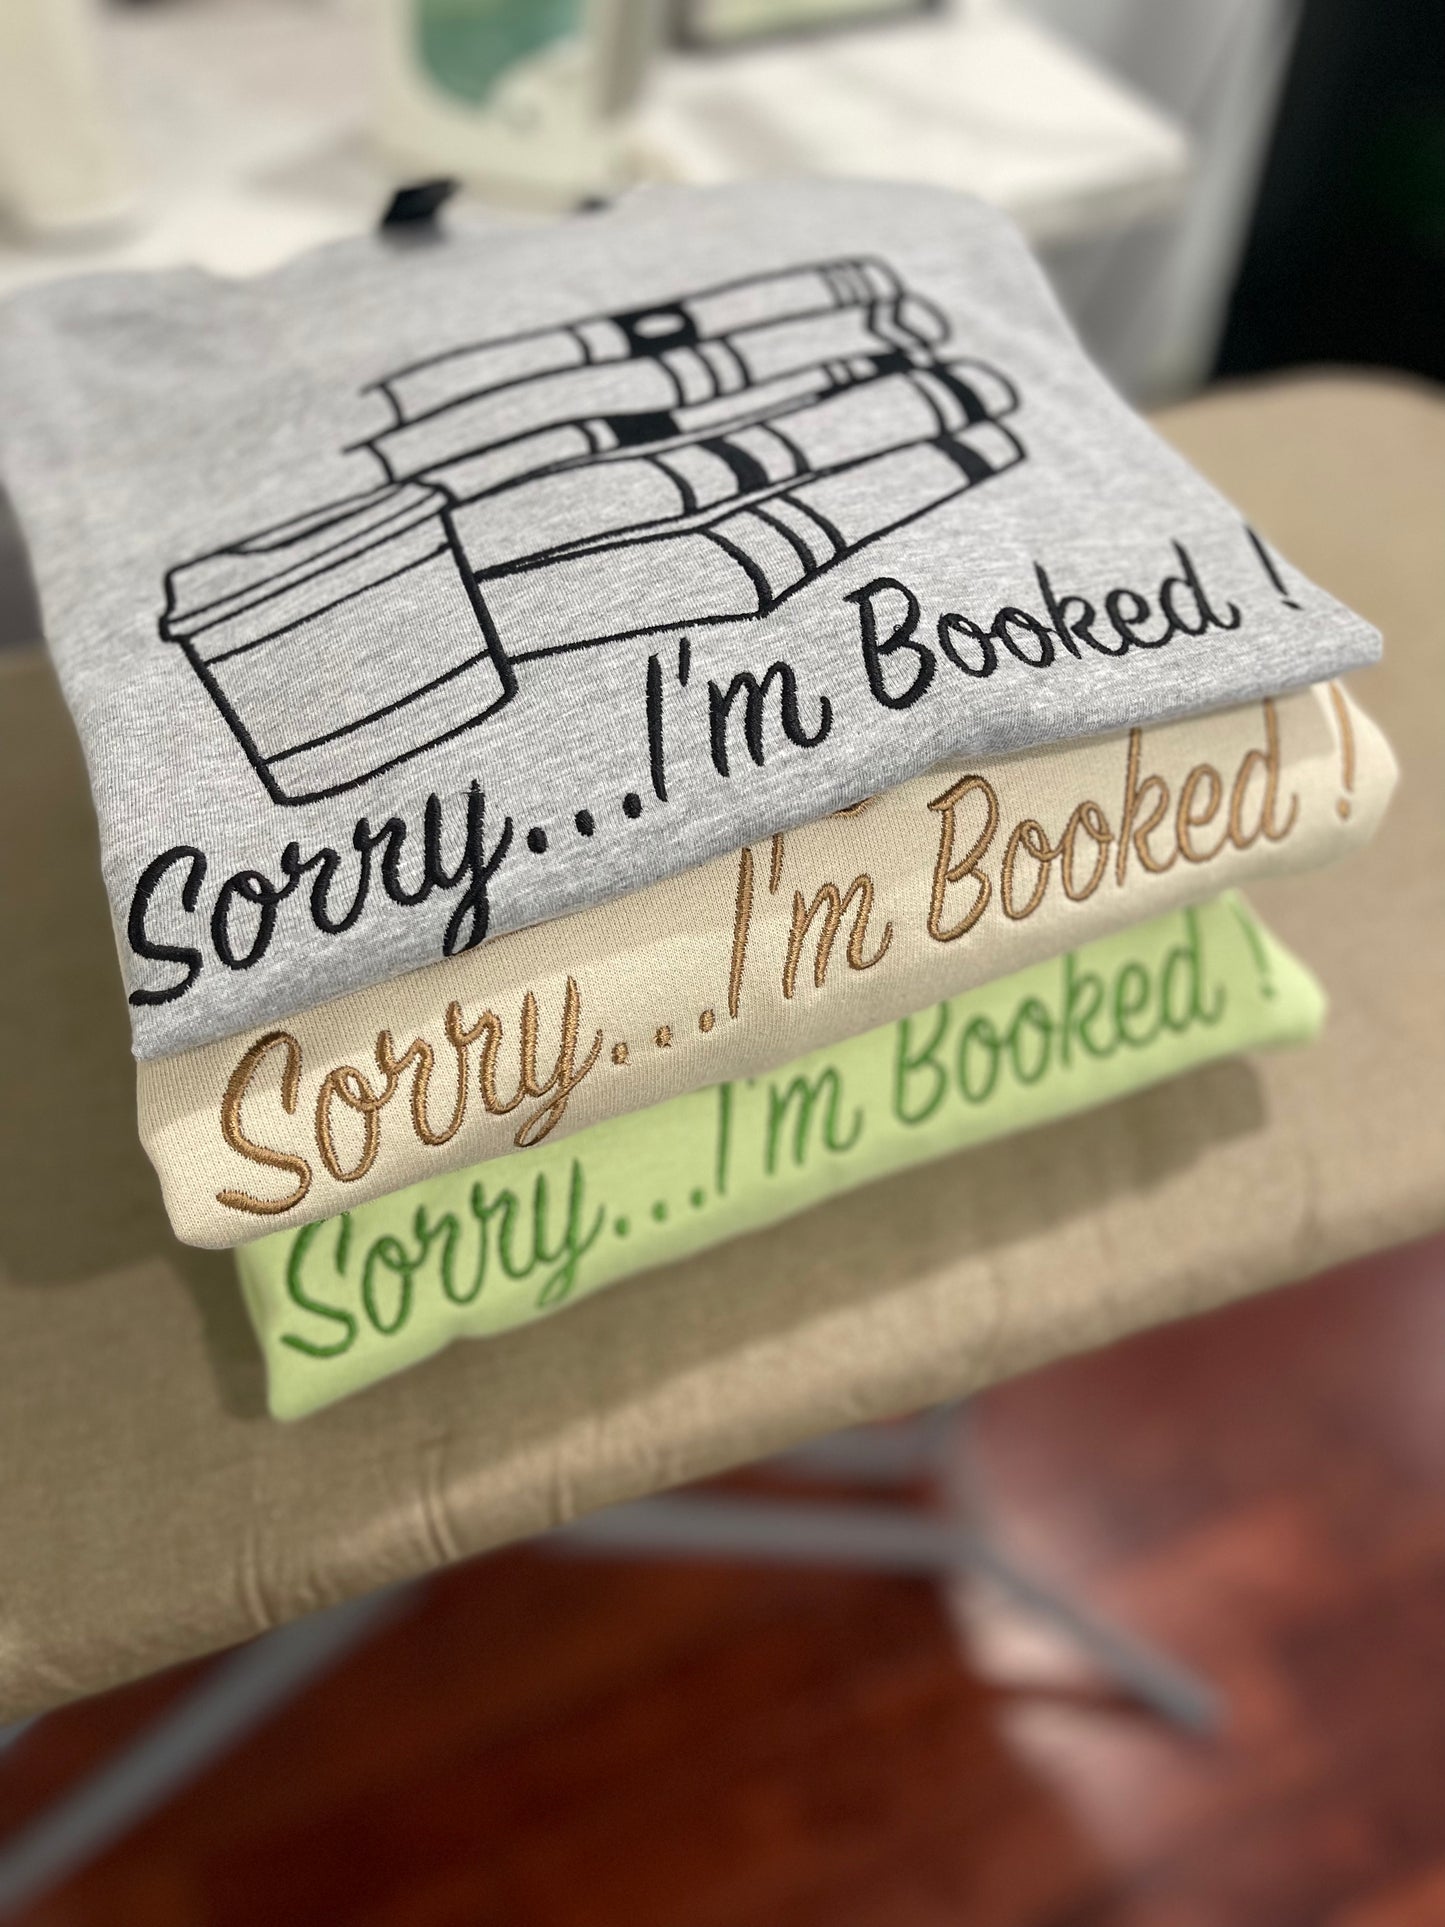 Sorry...I'm Booked!